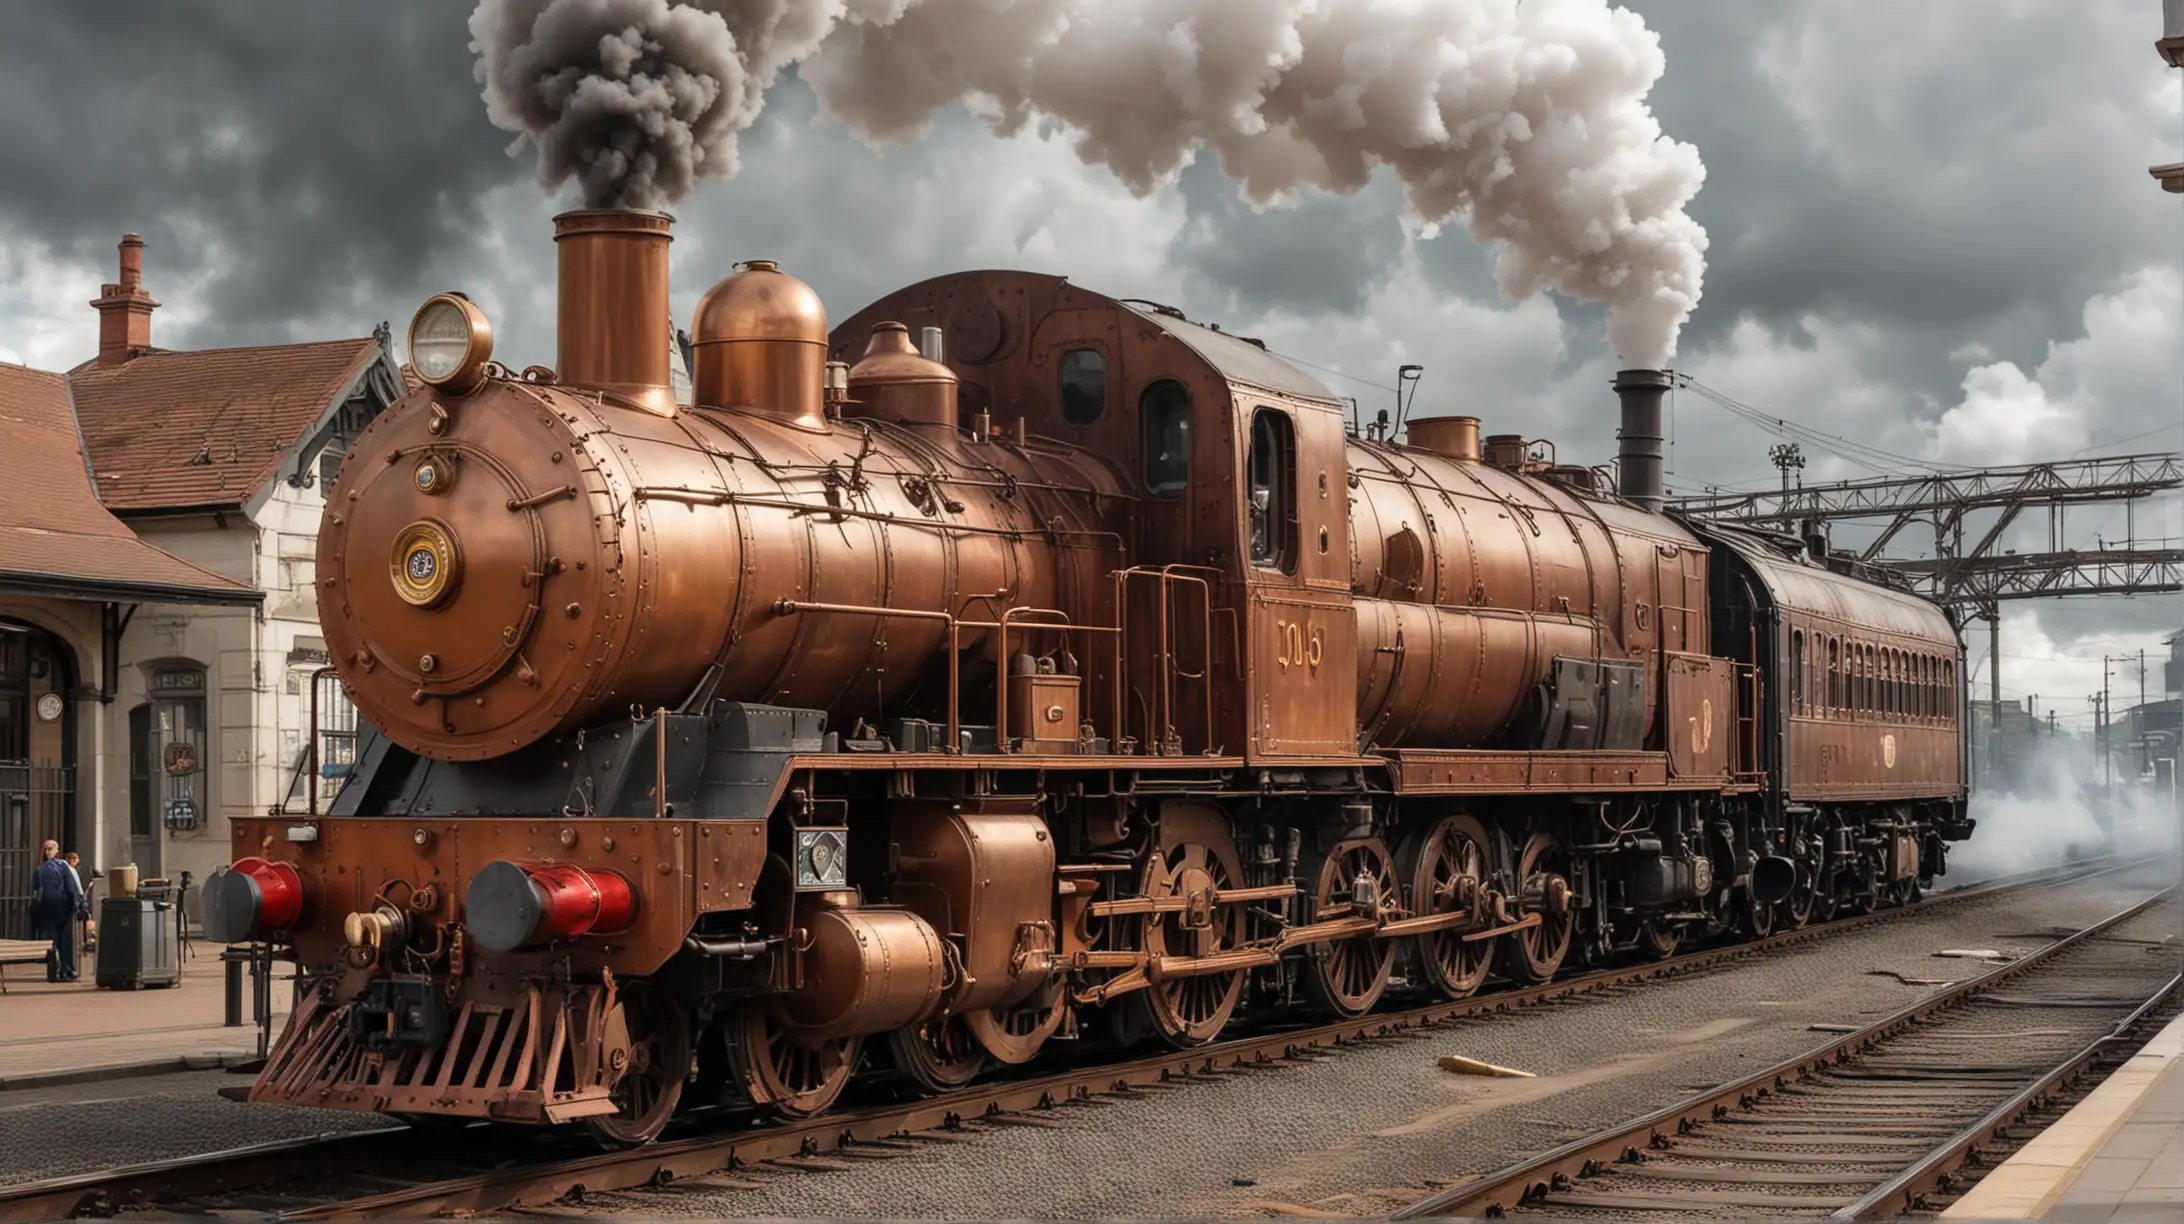 A very big steampunk diesel locomotive waits near a semaphore waiting for entering a steampunk railway station, much steam and smoke, the locomotive is made of copper and brass, cloudy